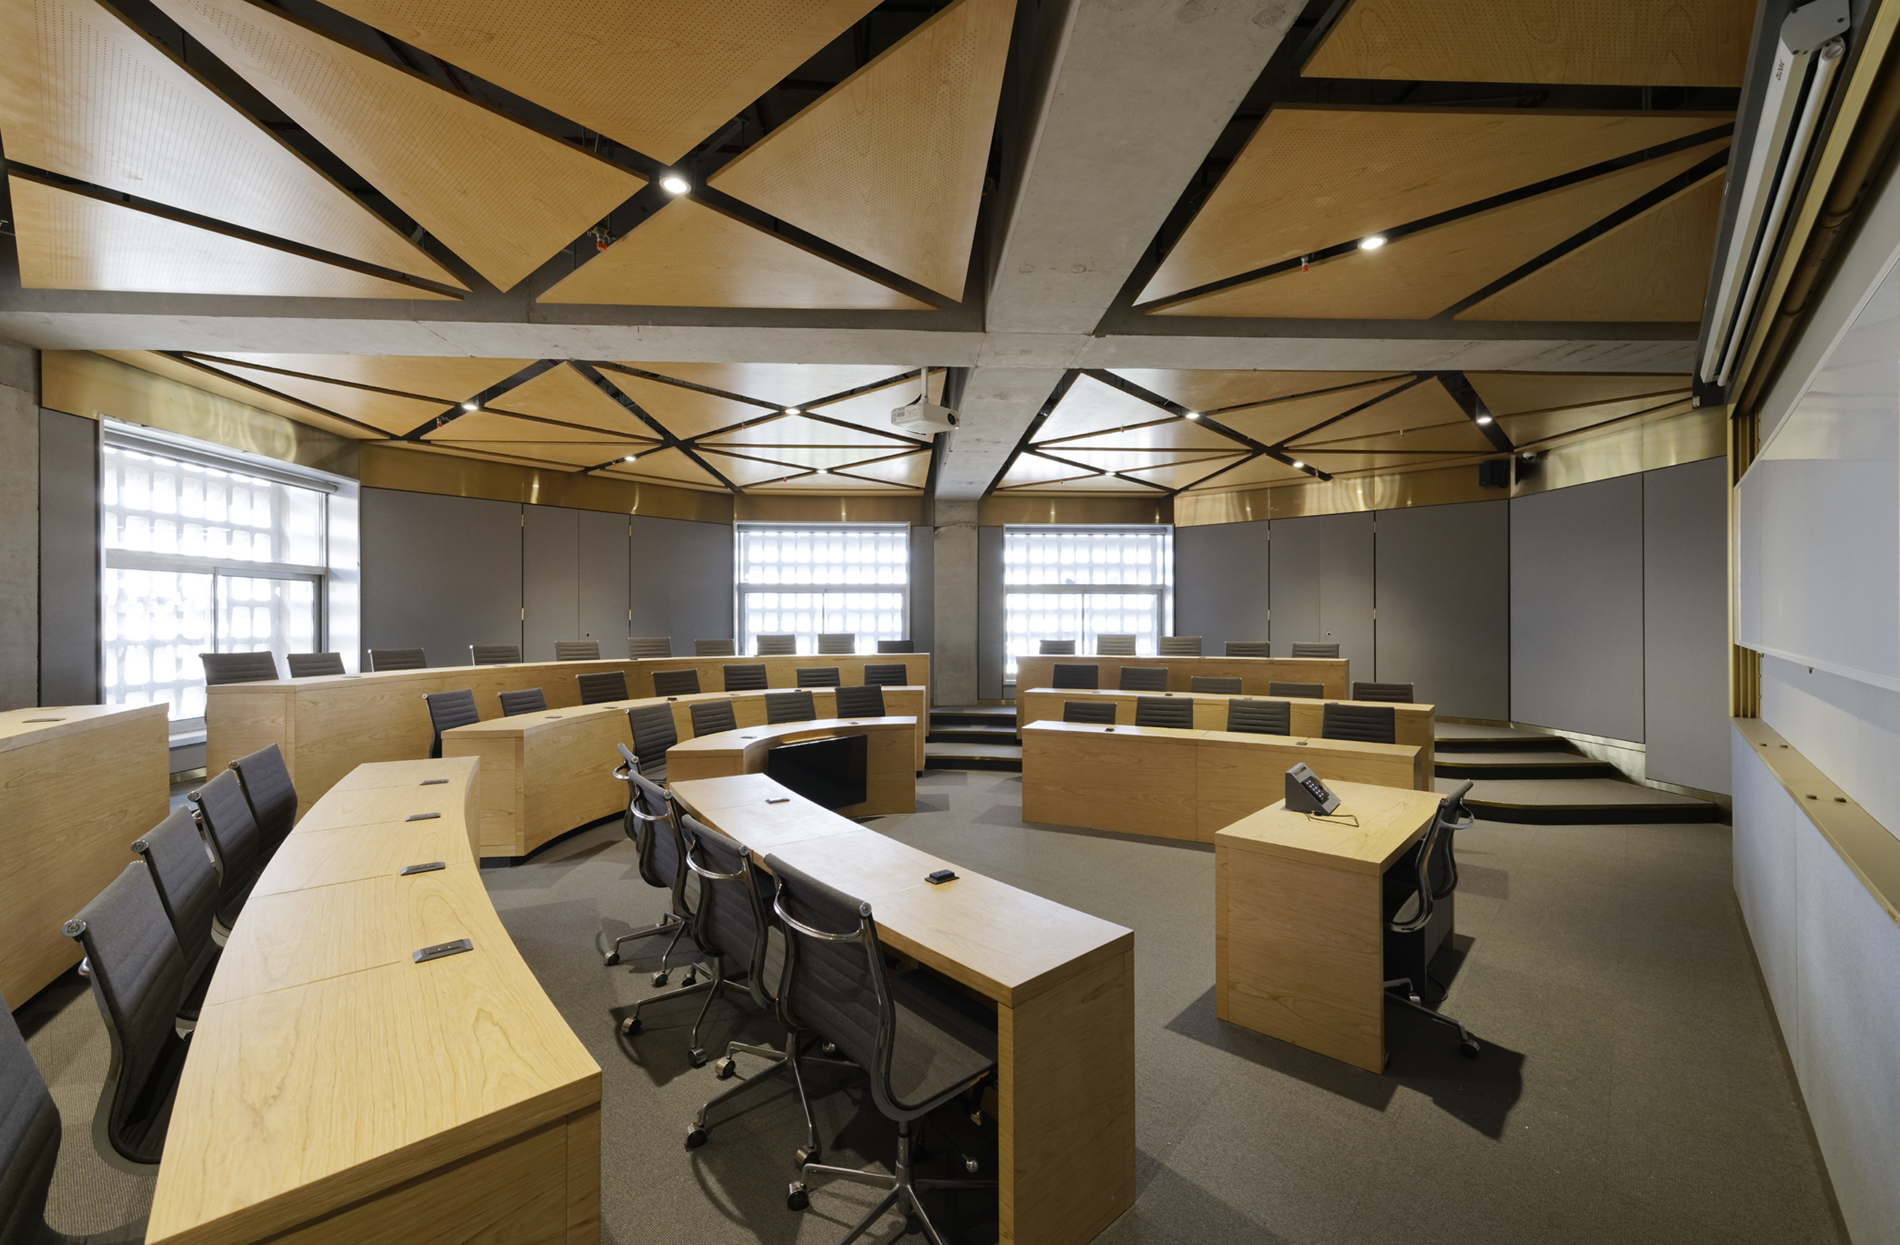 D Y Patil Centre of Excellence_Classroom Triangular Ceiling_1